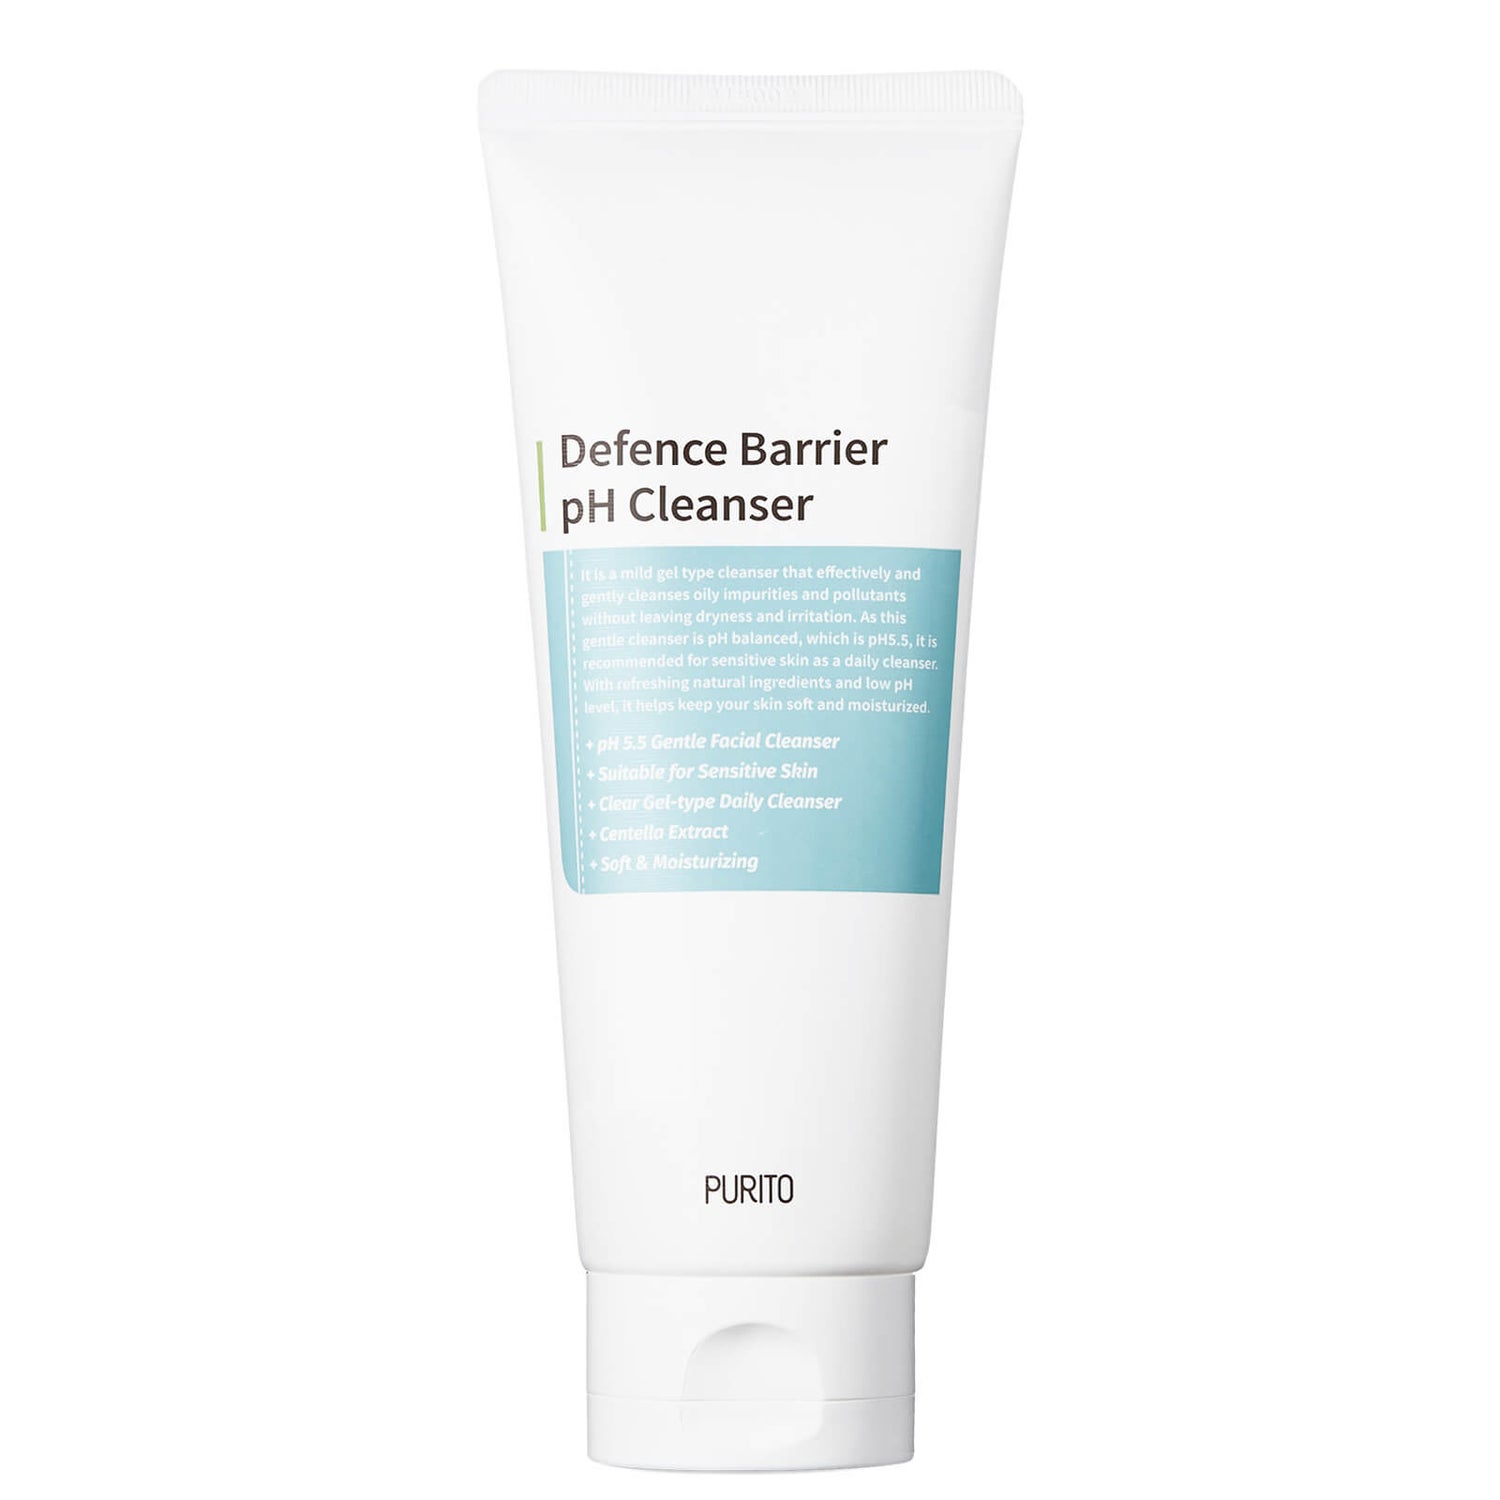 PURITO Defence Barrier pH Cleanser 150ml